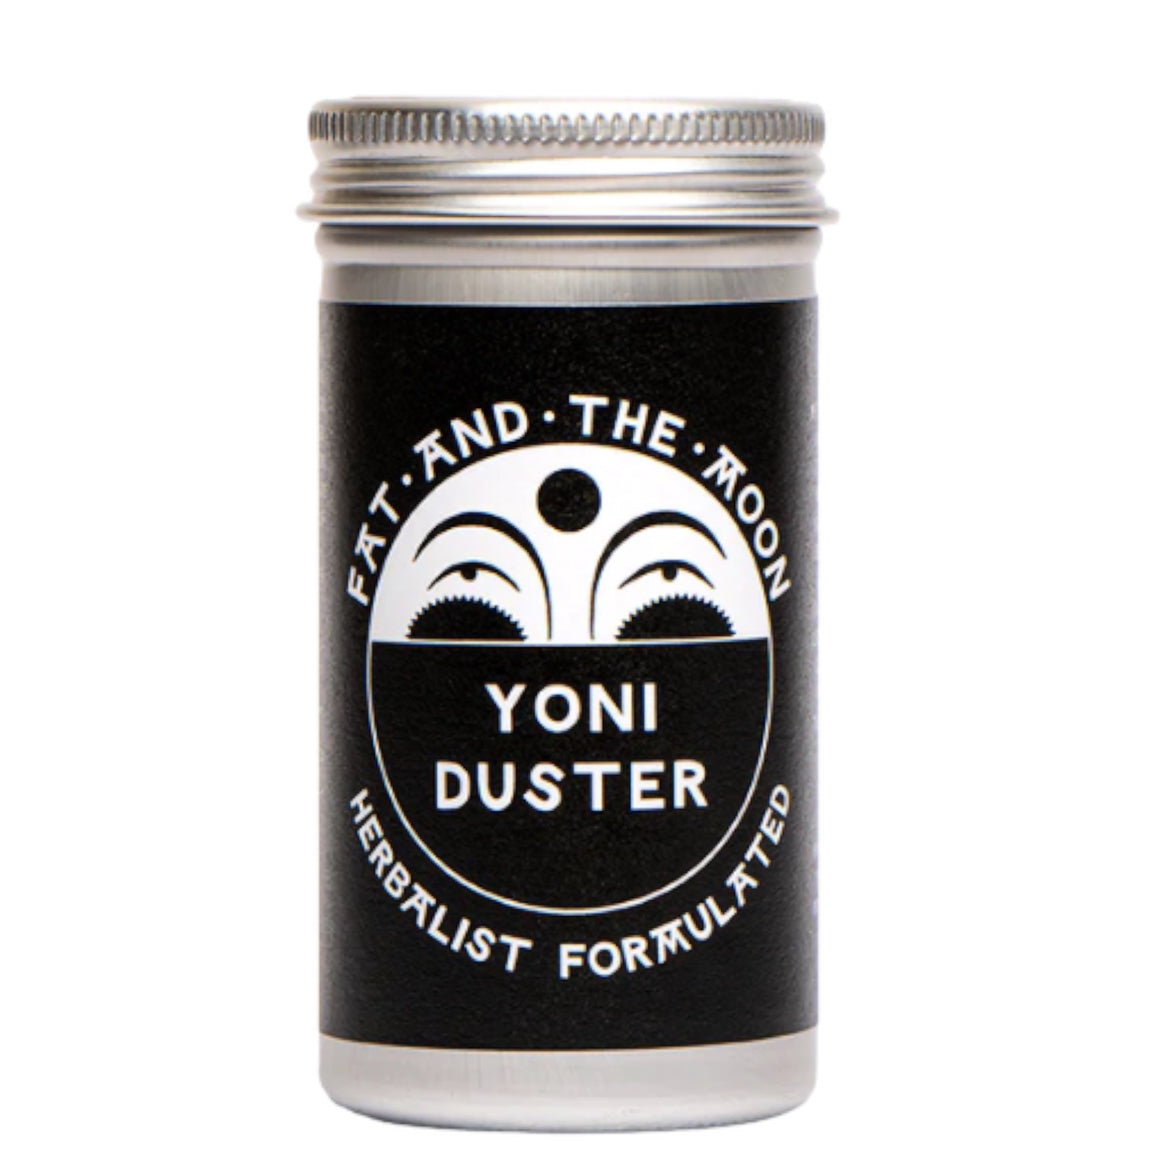 Yoni Duster - Fat & The Moon 2oz